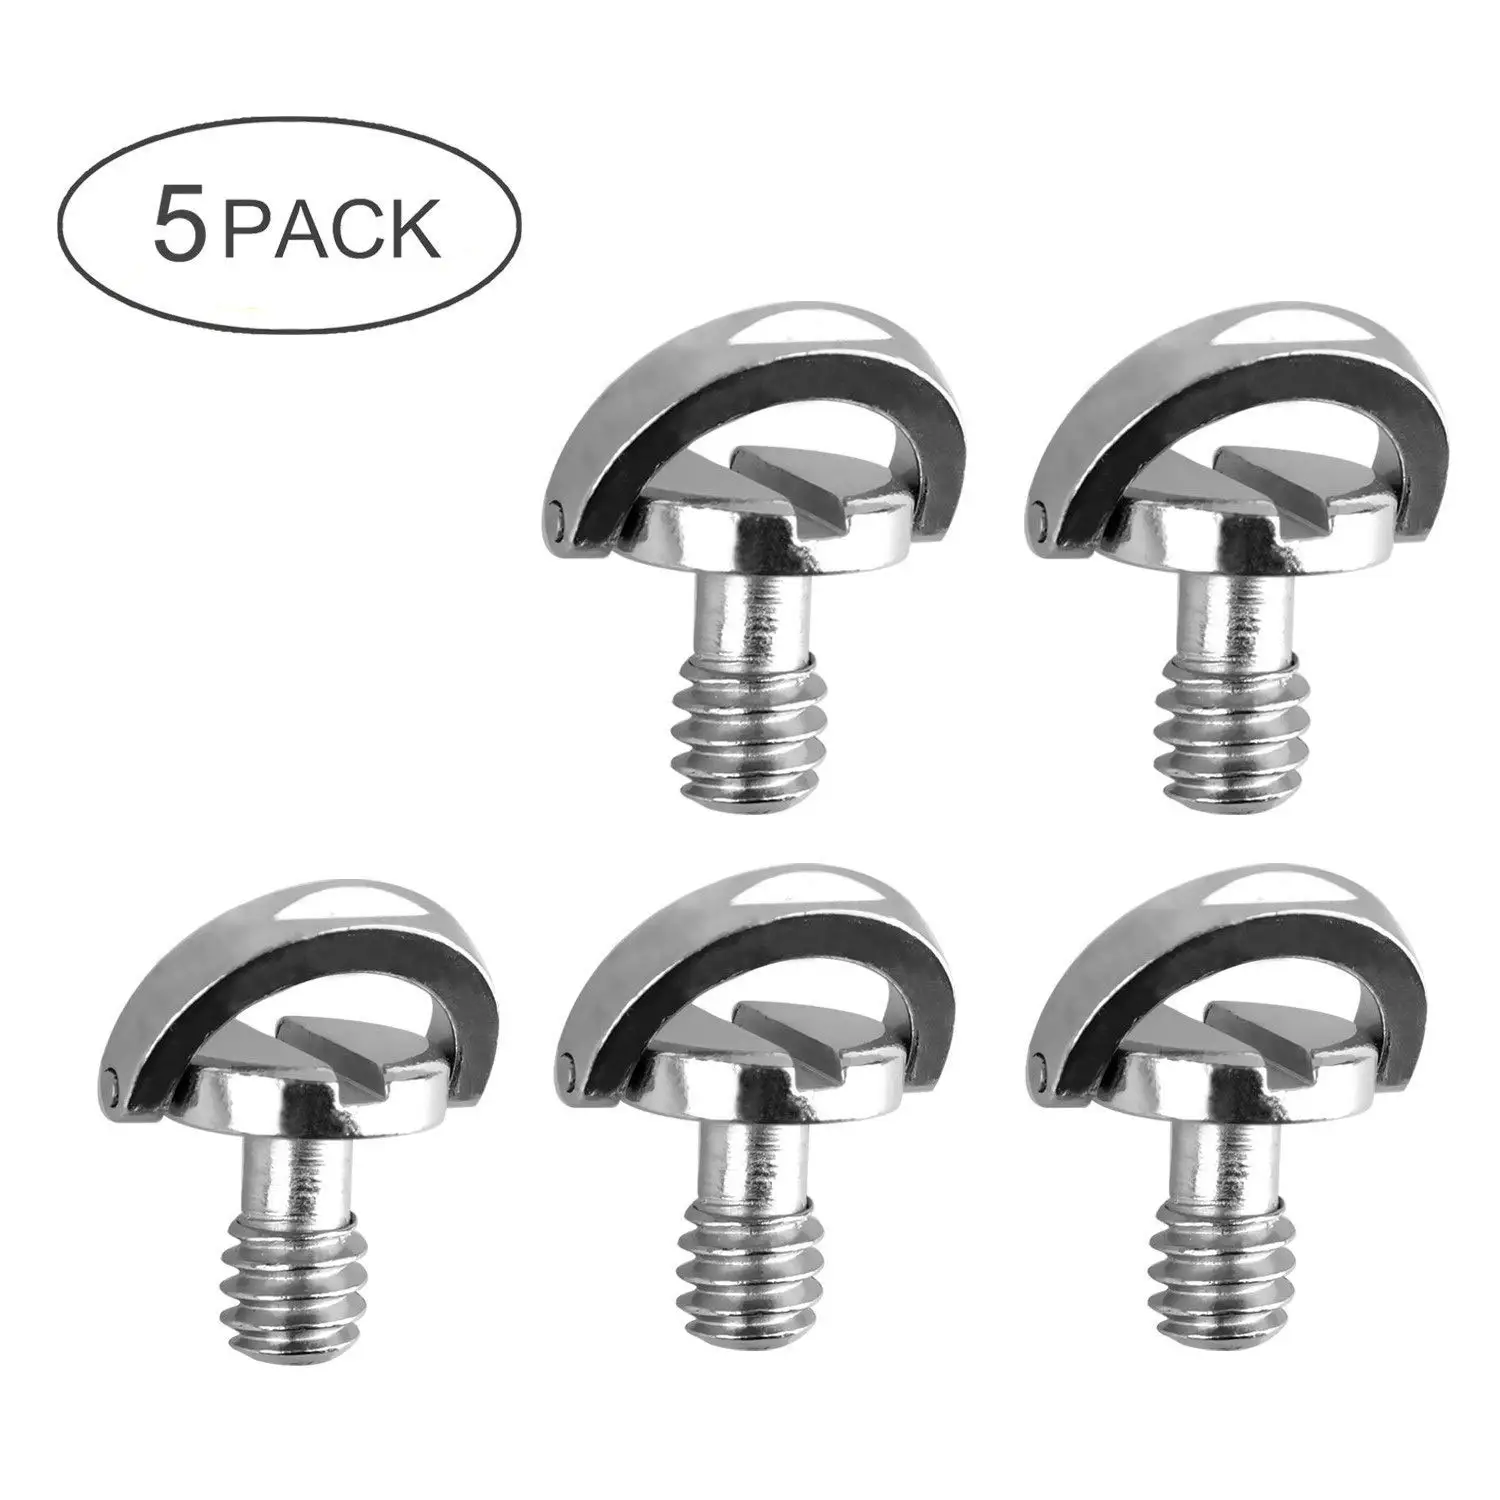 

5 Pack 1/4inch Quick Release Plate Mounting Screw D-ring D Shaft QR Screw Adapter Mount for DSLR Camera Tripod Monopod QR Plat